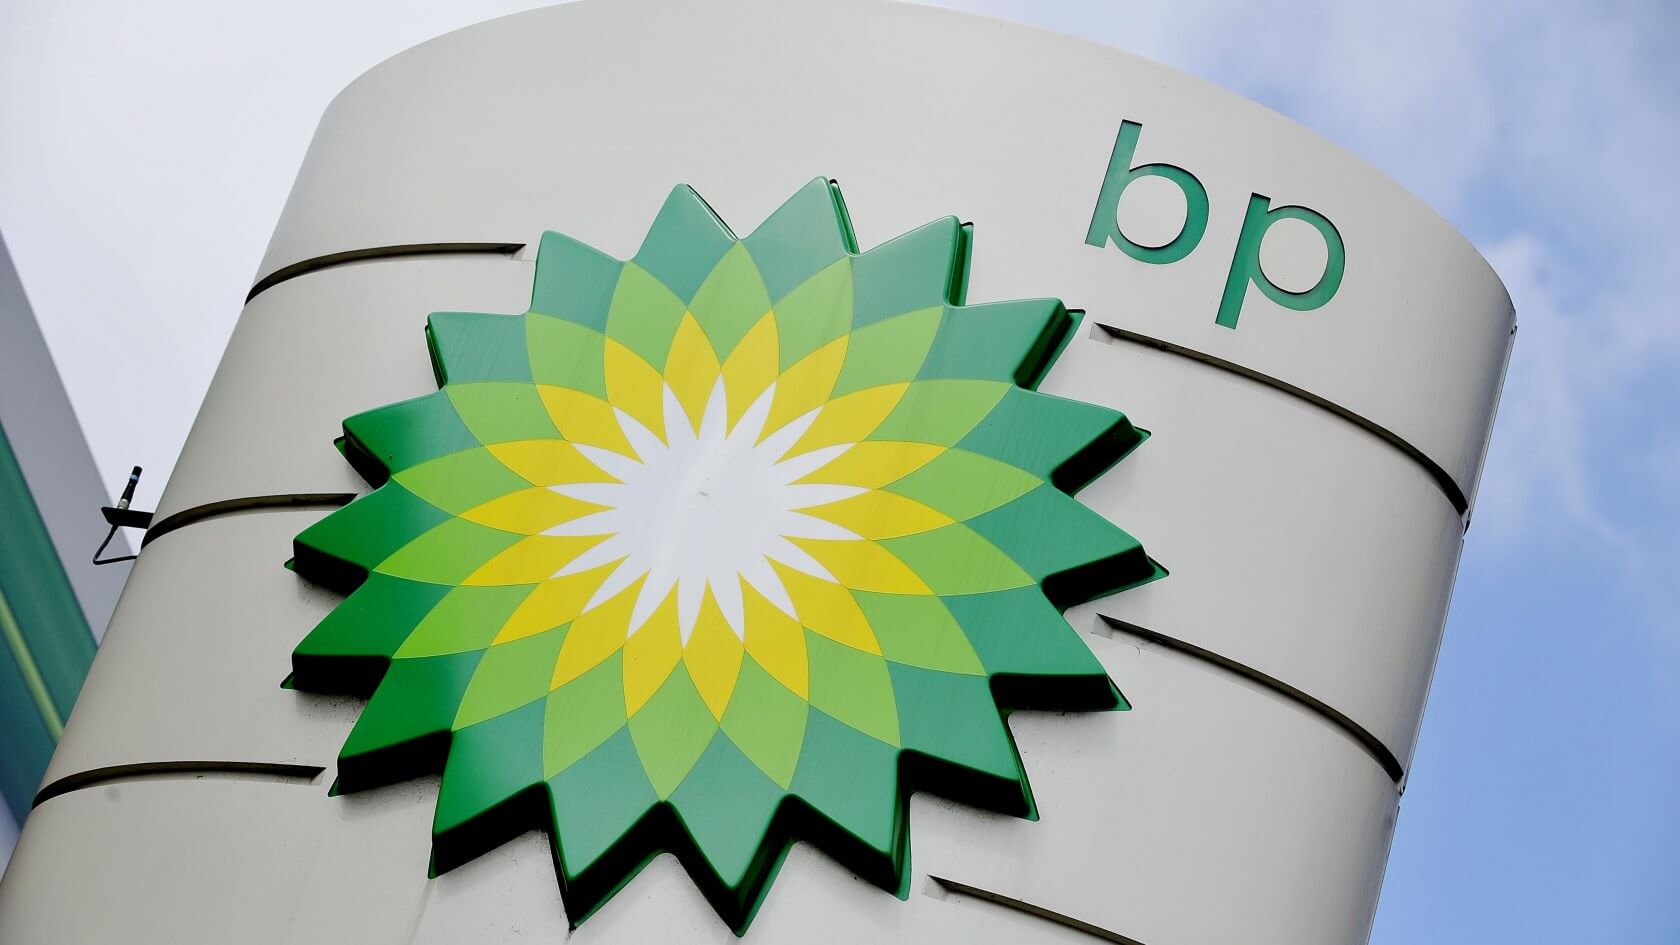 Oil giant BP commits to reaching 'net zero' emissions by 2050